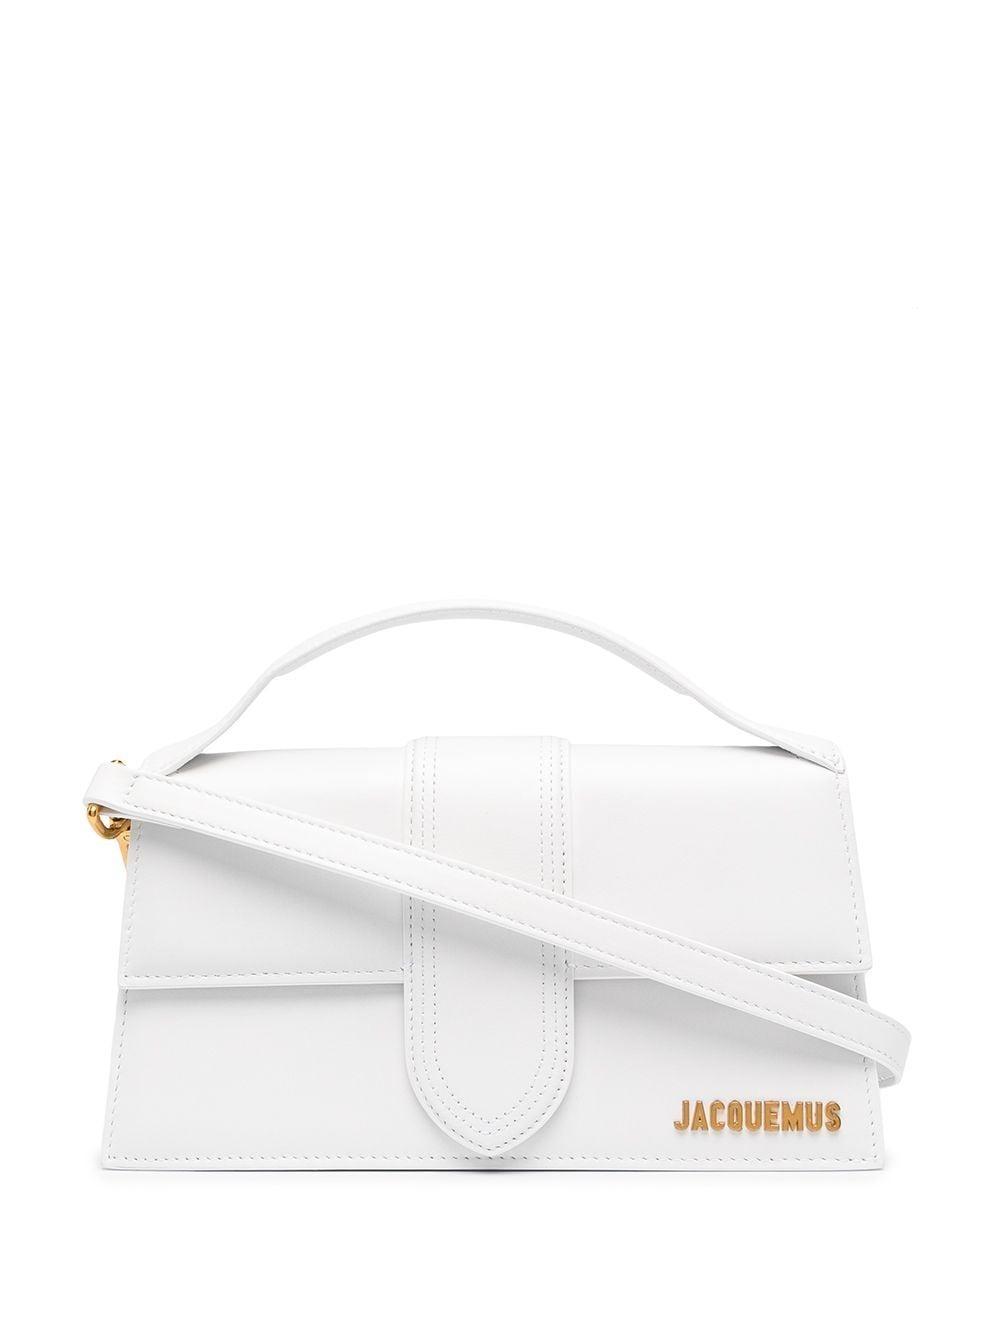 Jacquemus Leather Le Grand Bambino Handbag in White - Lyst